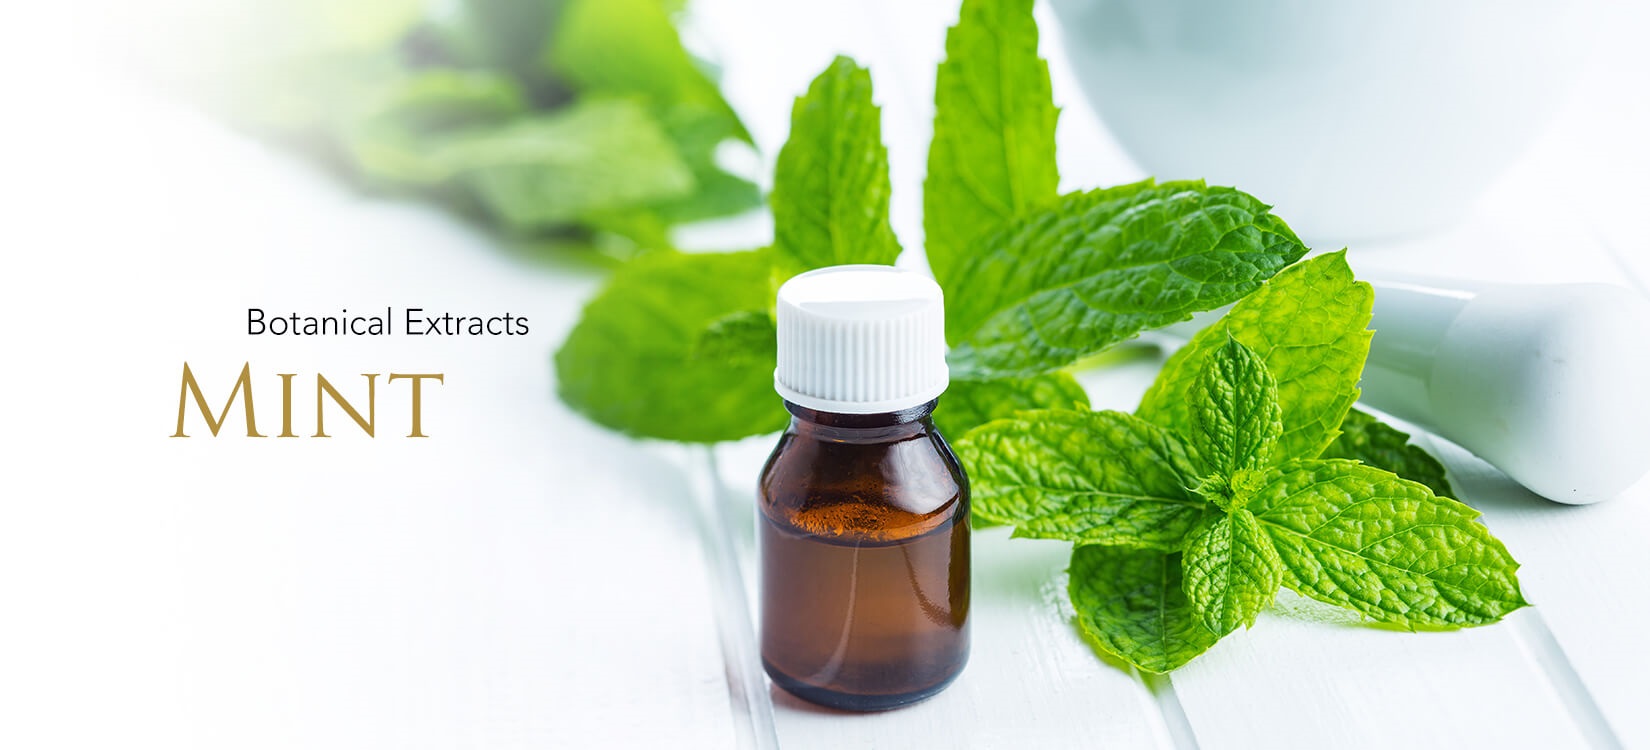 Botanical Extracts Market to reach at a CAGR of 8.7% by 2025 Globally